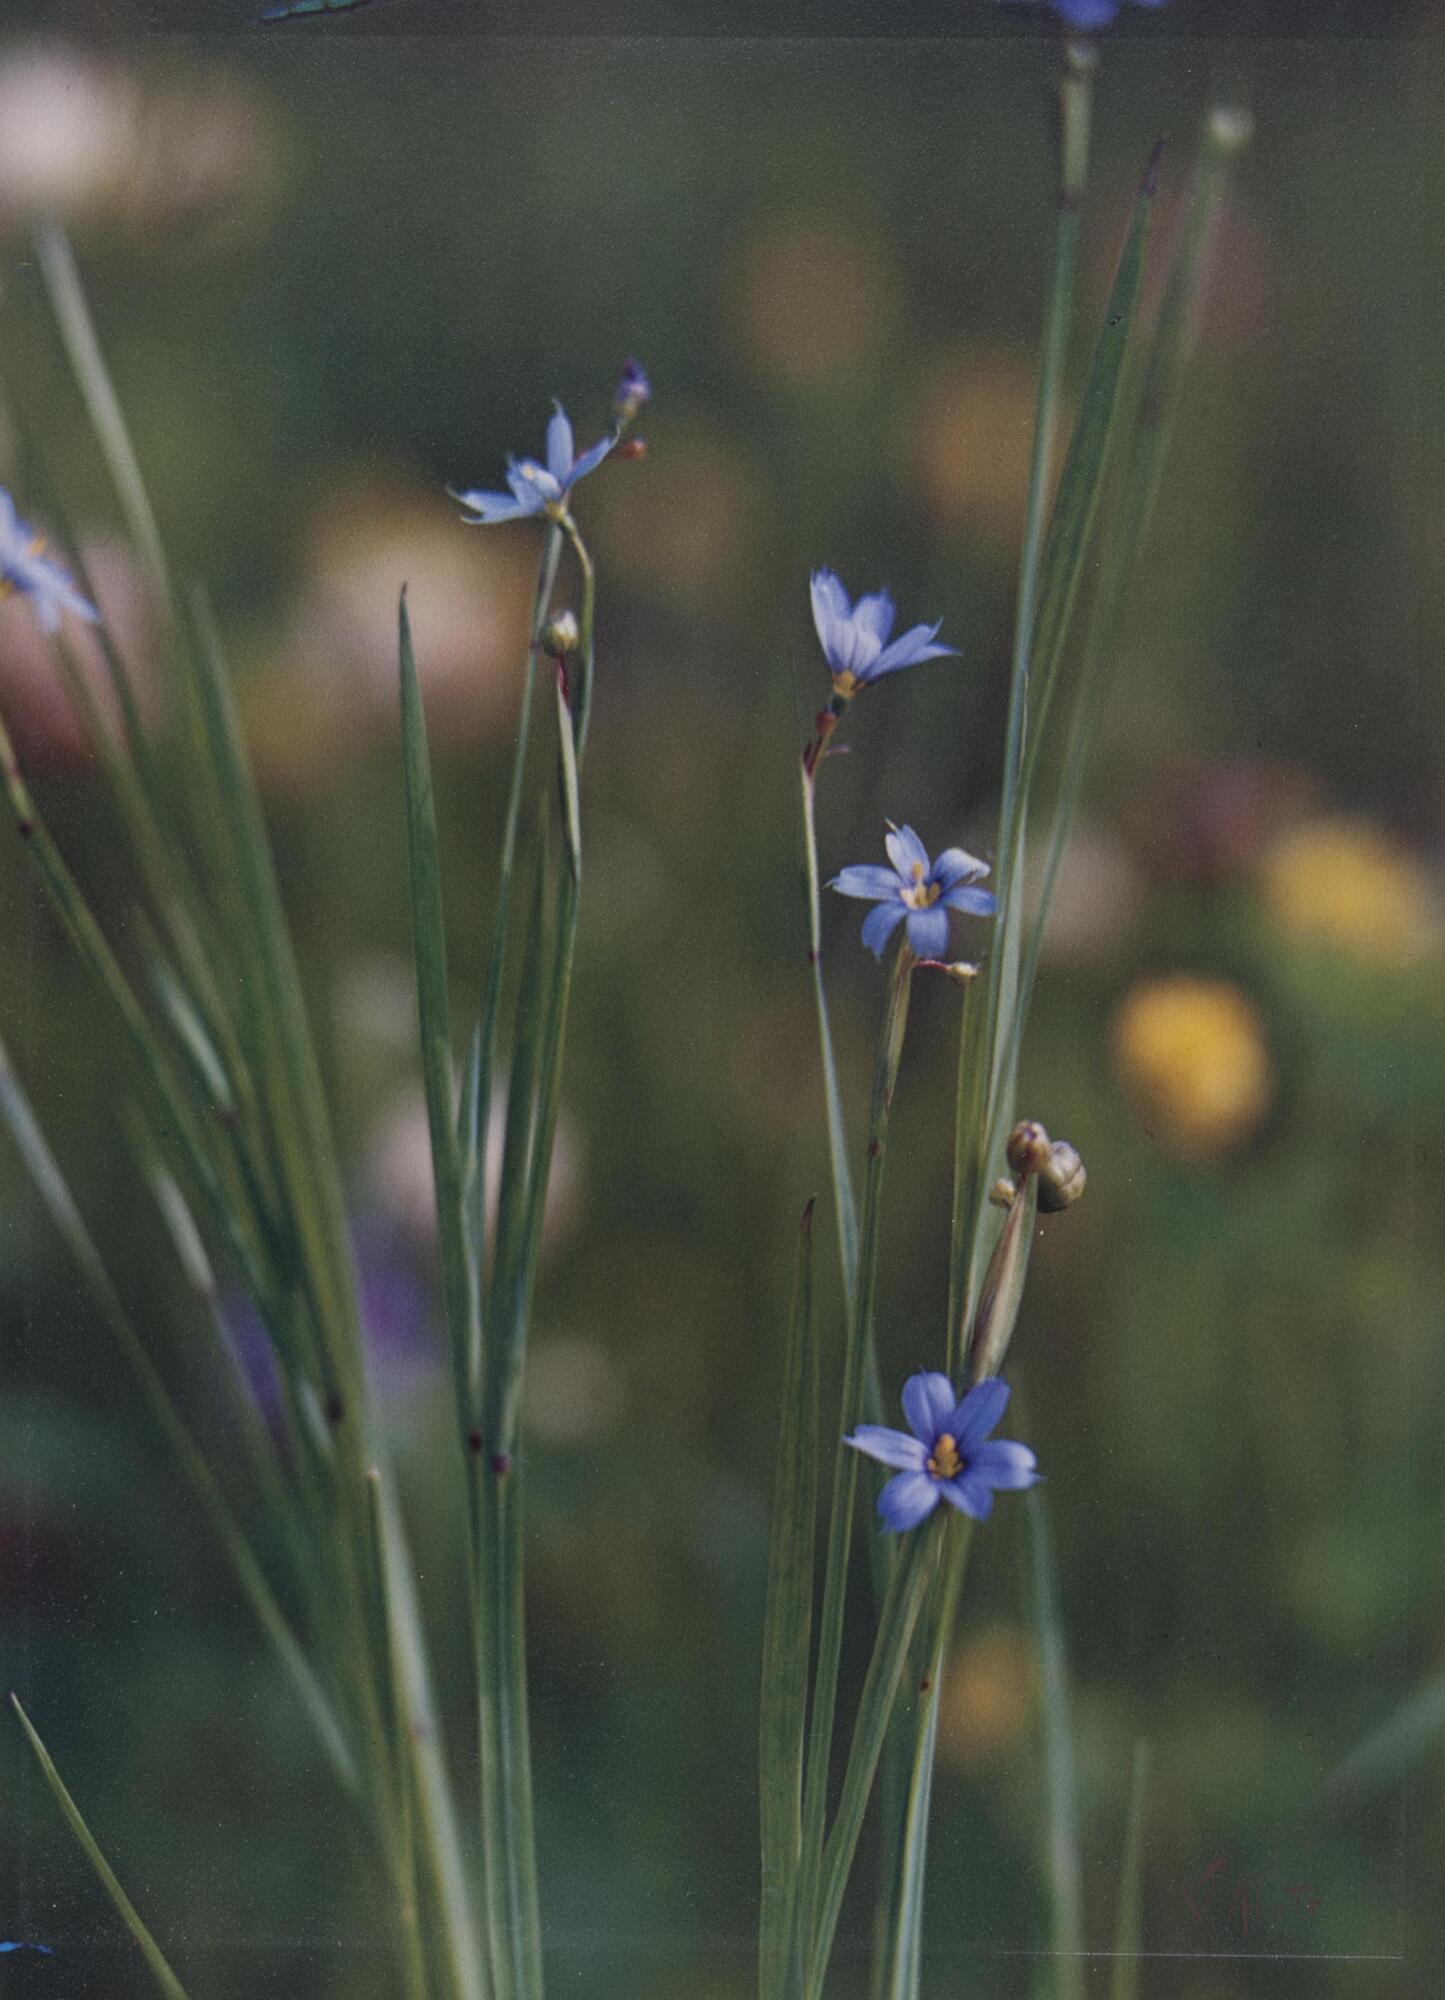 This photograph with shallow depth of field focuses on the narrow, grassy stems and small blue flowers of the perennial plant. In the blurred background, patches of bright yellow, subdued mauves and purples, and bright greens reveal that there is a meadow of flowers and grasses beyond.